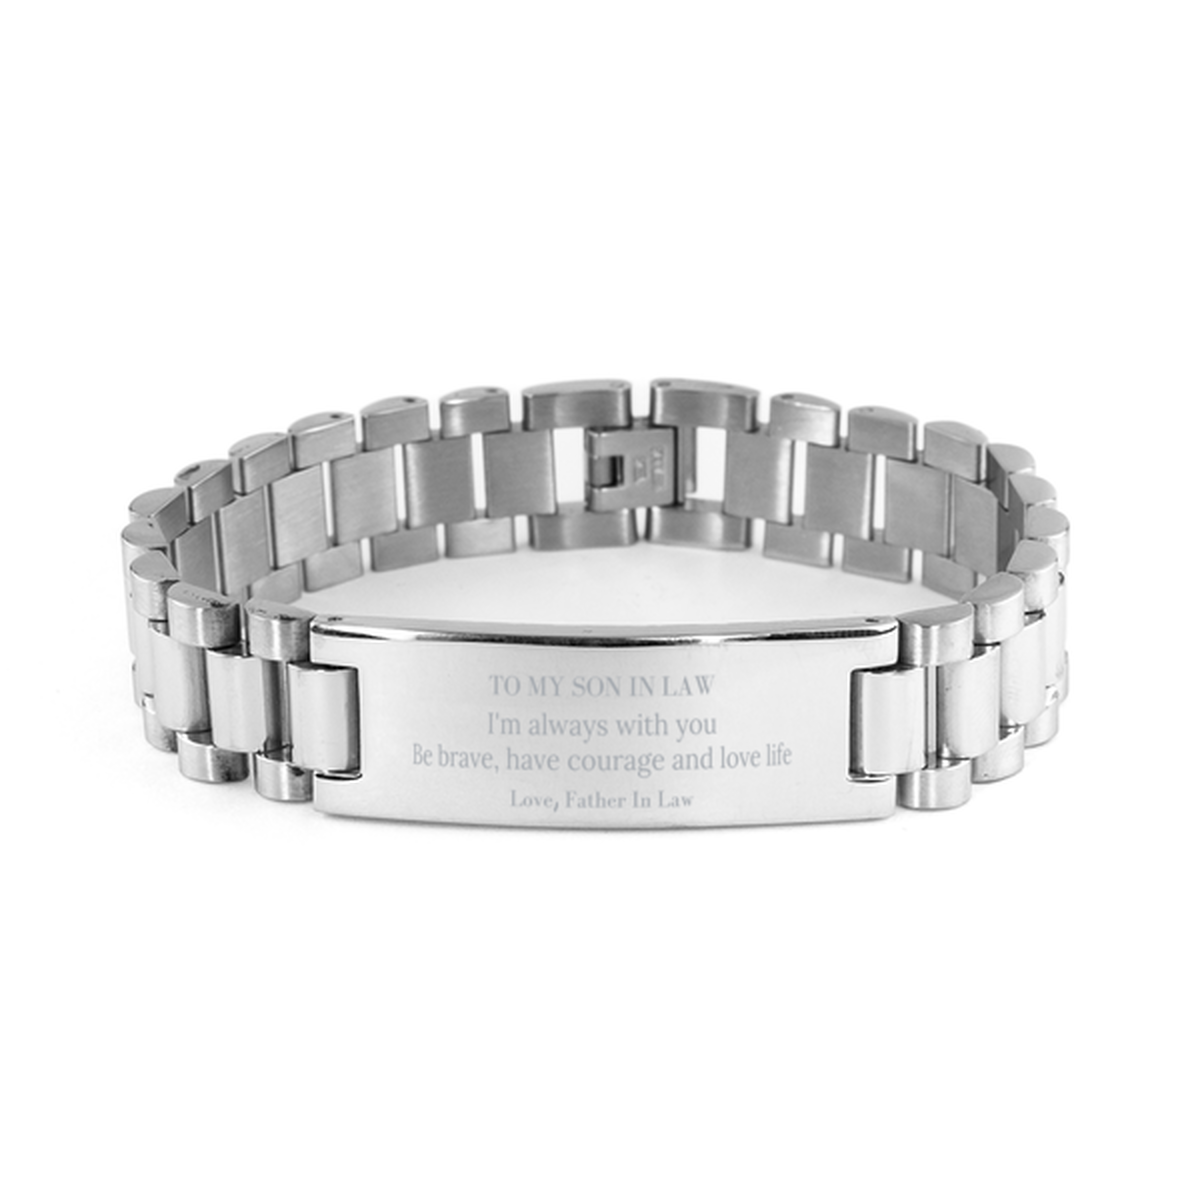 To My Son In Law Gifts from Father In Law, Unique Ladder Stainless Steel Bracelet Inspirational Christmas Birthday Graduation Gifts for Son In Law I'm always with you. Be brave, have courage and love life. Love, Father In Law